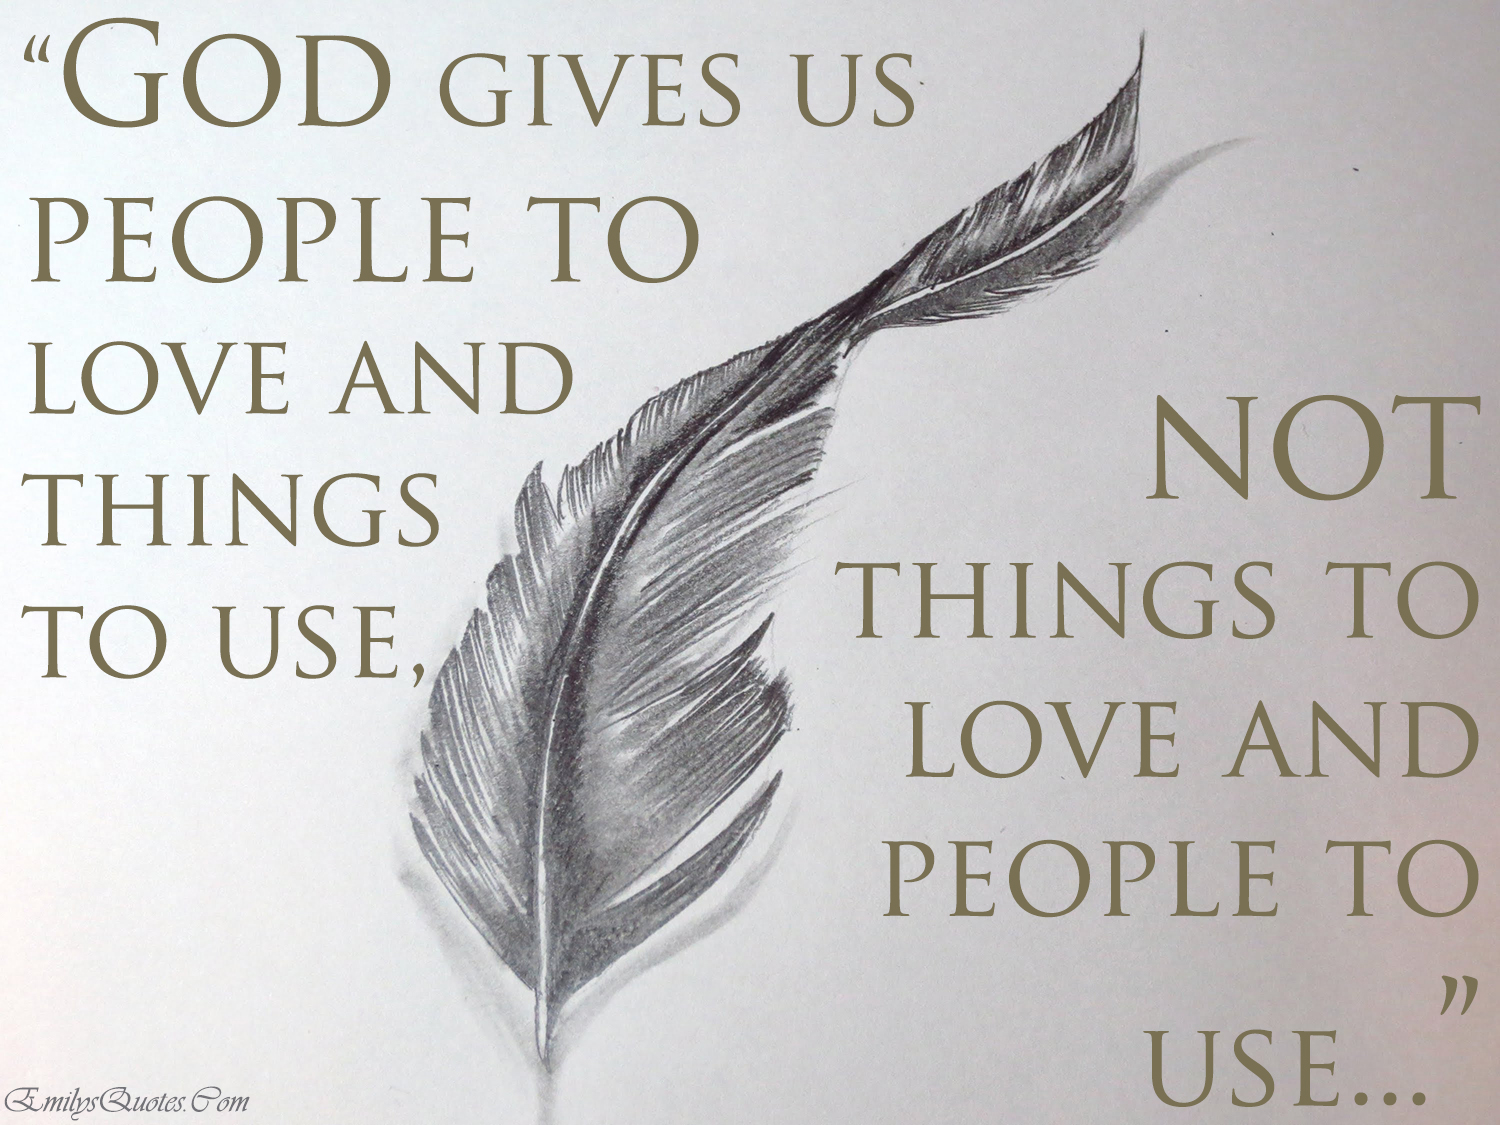 God gives us people to love and things to use, not things to love and people to use